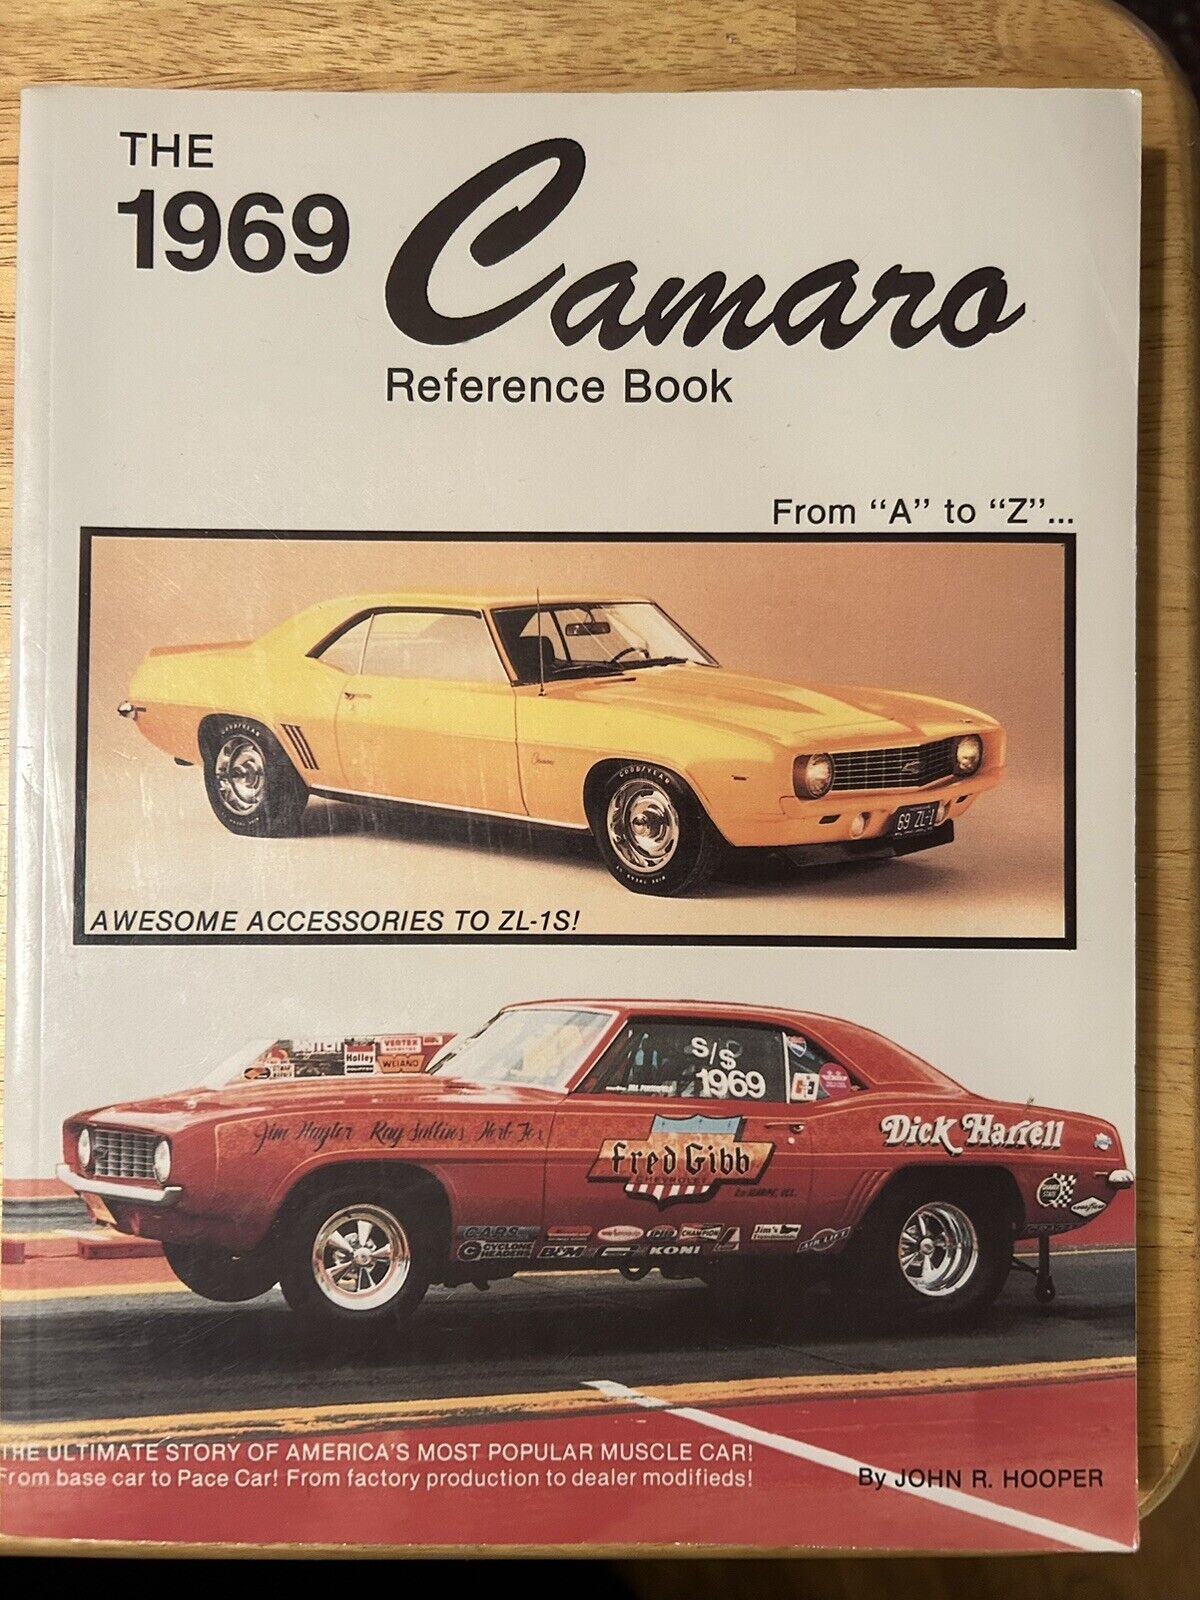 The 1969 Camaro Reference book from \